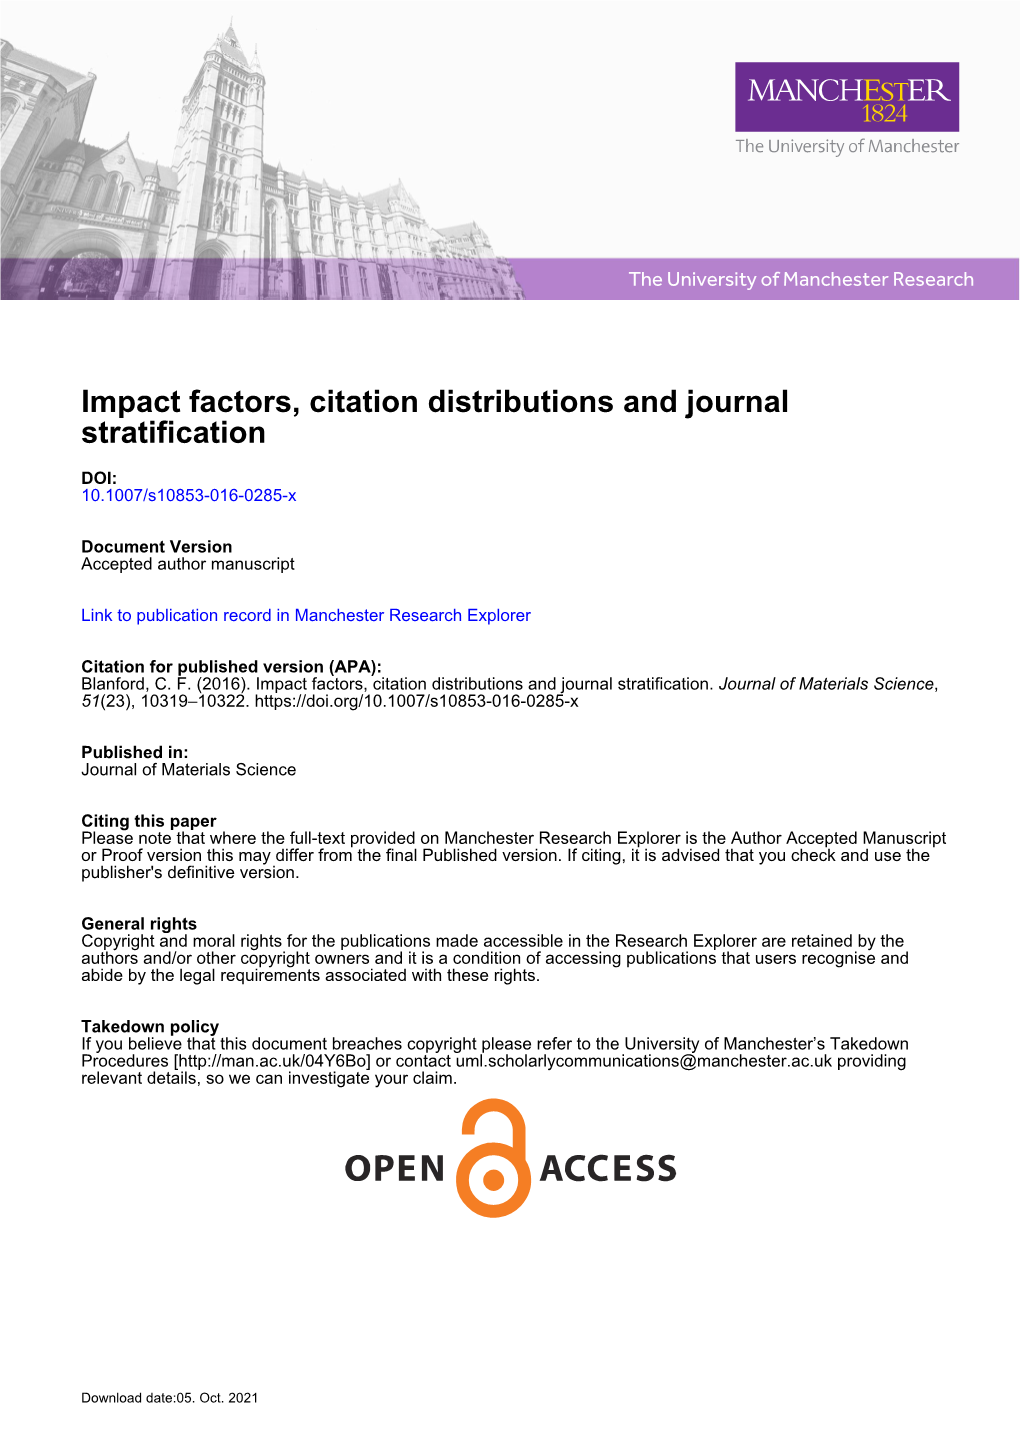 Impact Factors, Citation Distributions and Journal Stratification